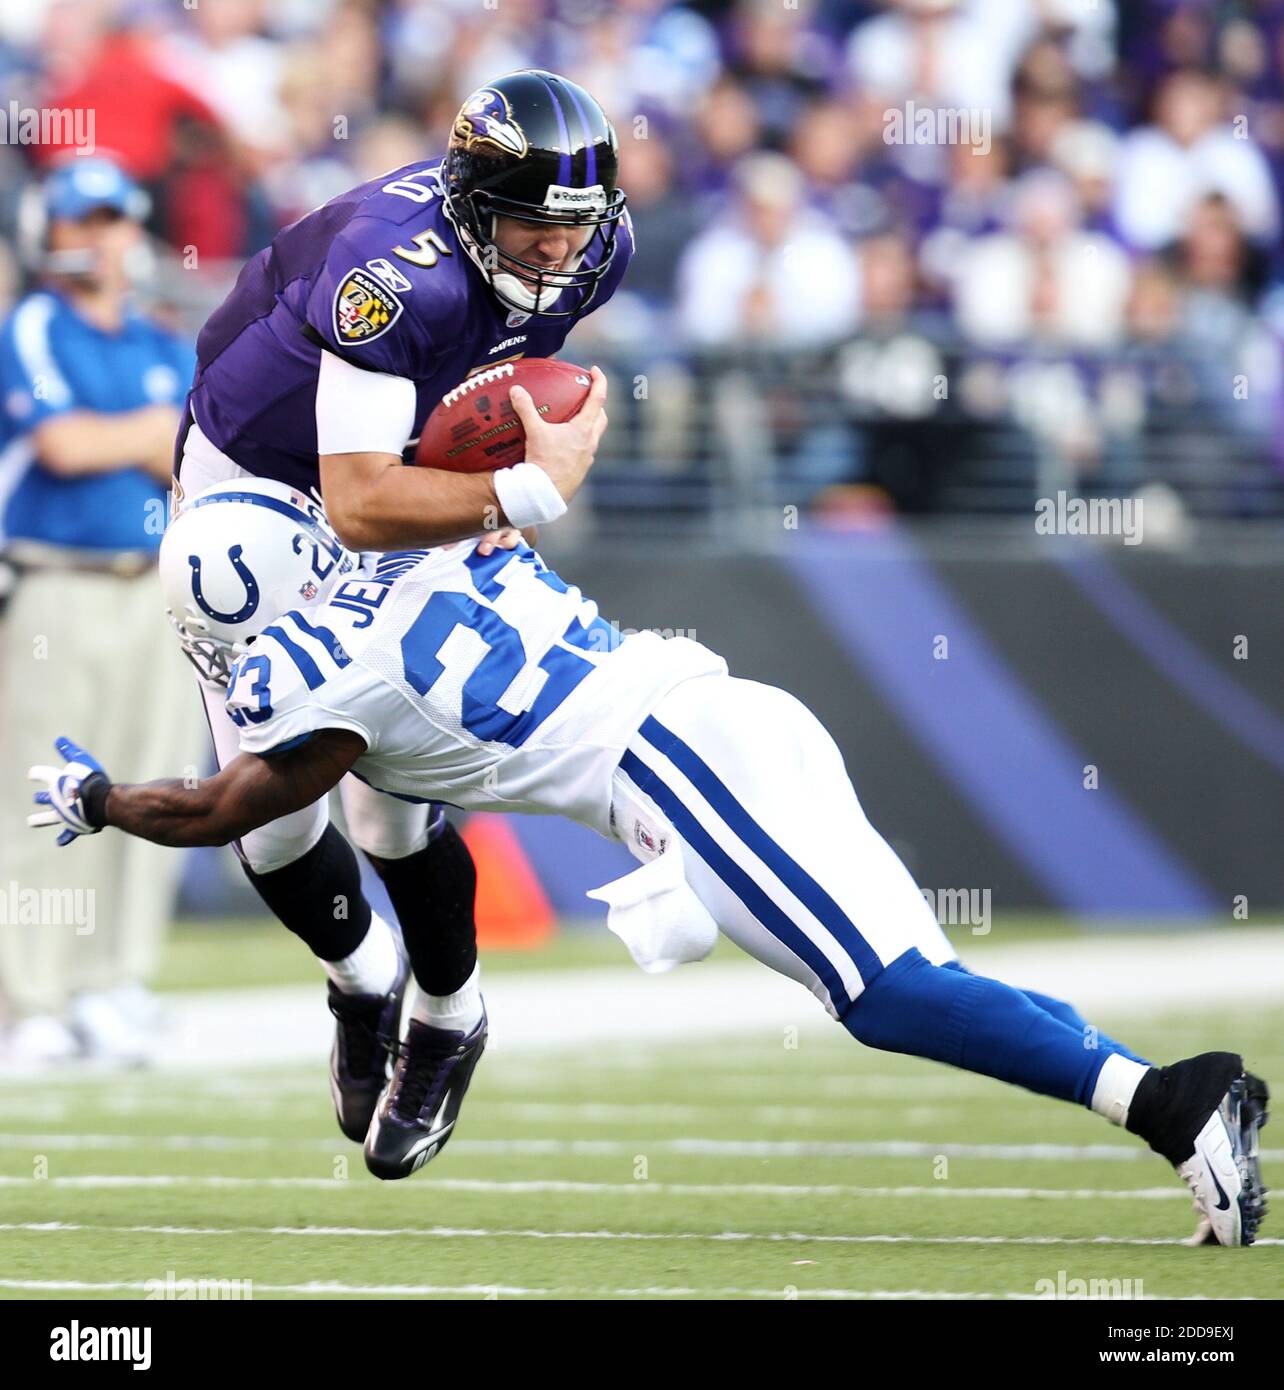 NO FILM, NO VIDEO, NO TV, NO DOCUMENTARY - Quarterback Joe Flacco of the Baltimore Ravens (5) is tackled by Tim Jennings of the Indianapolis Colts (23) in the second half of their game in Baltimore, MD, USA on November 22, 2009. Photo by George Bridges/MCT/Cameleon/ABACAPRESS.COM Stock Photo